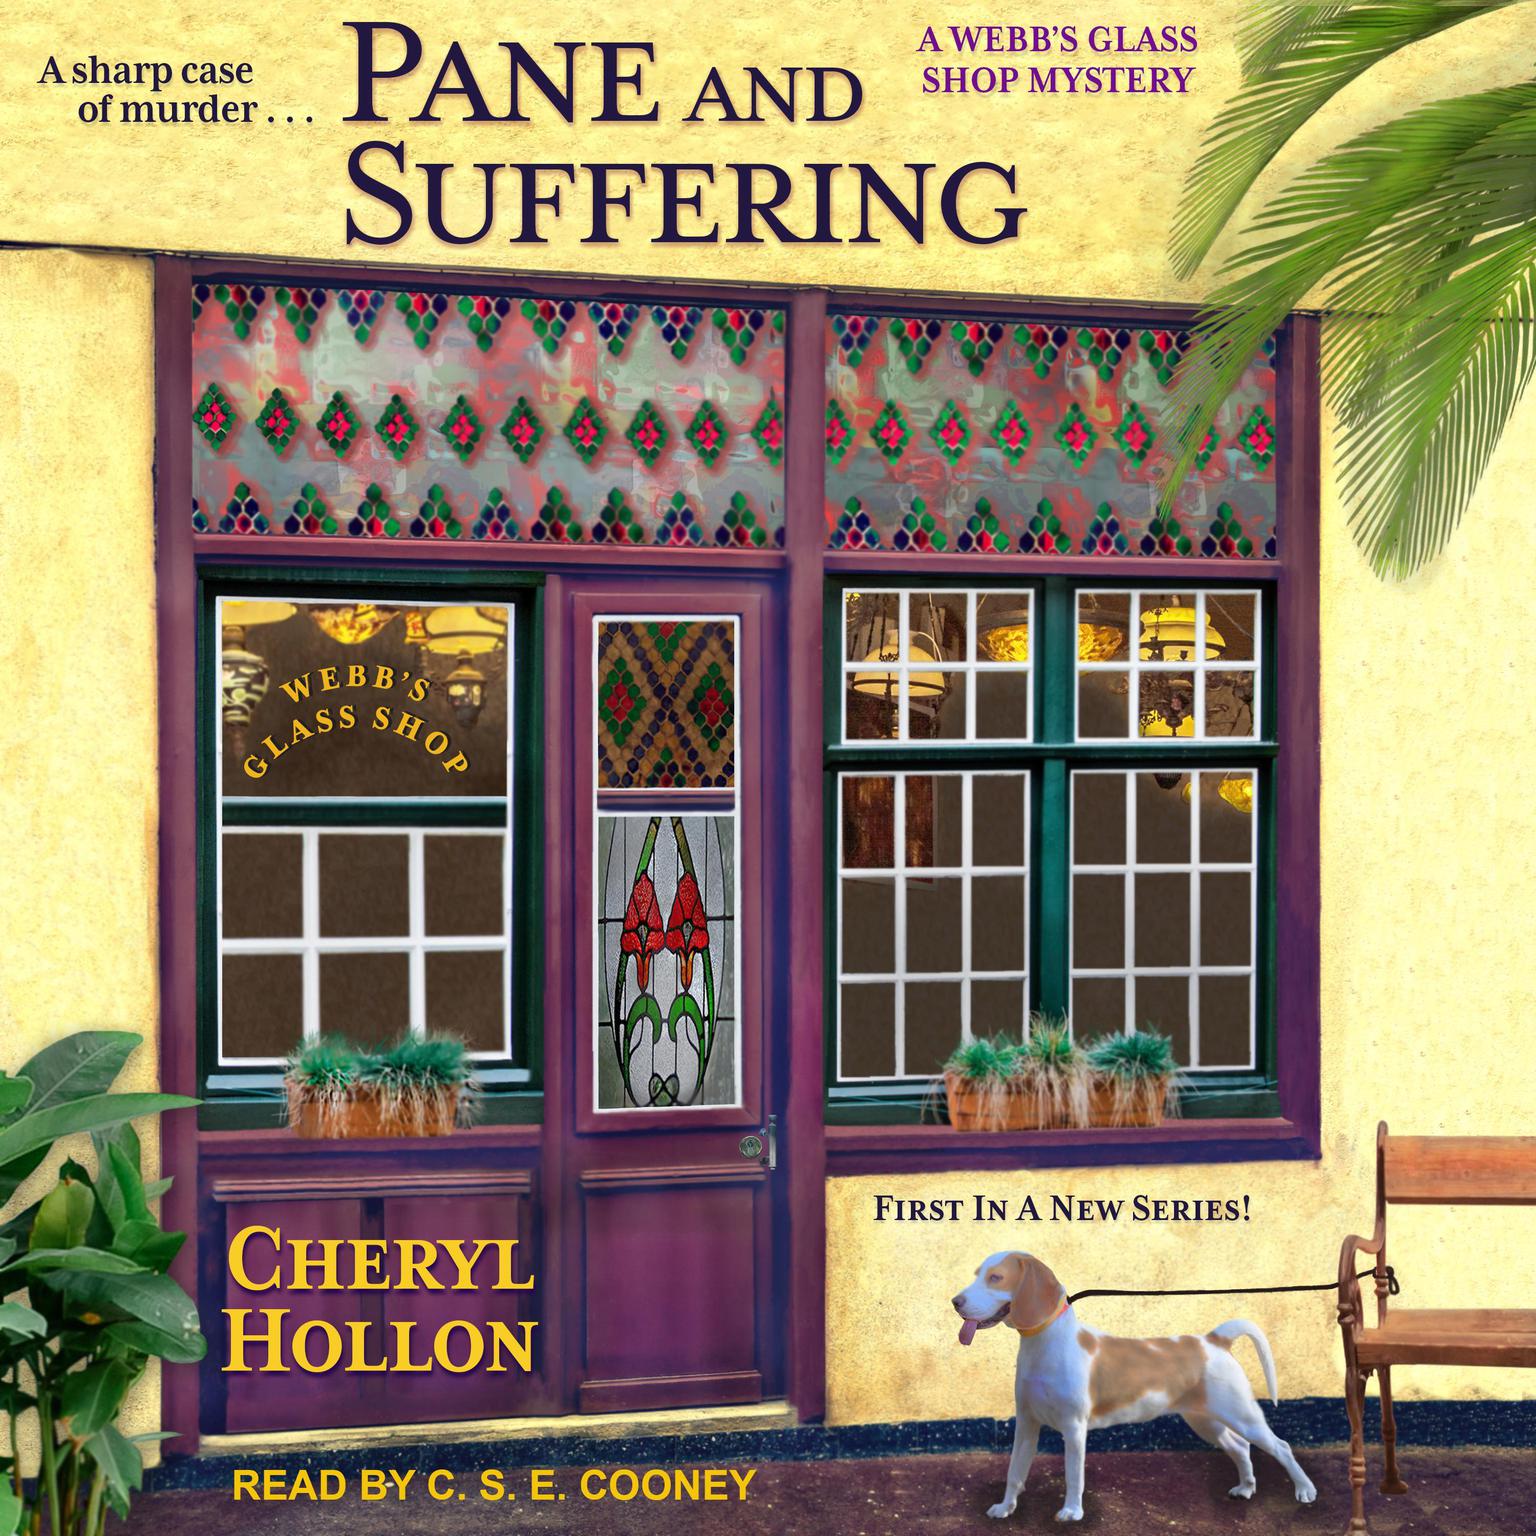 Pane and Suffering Audiobook, by Cheryl Hollon